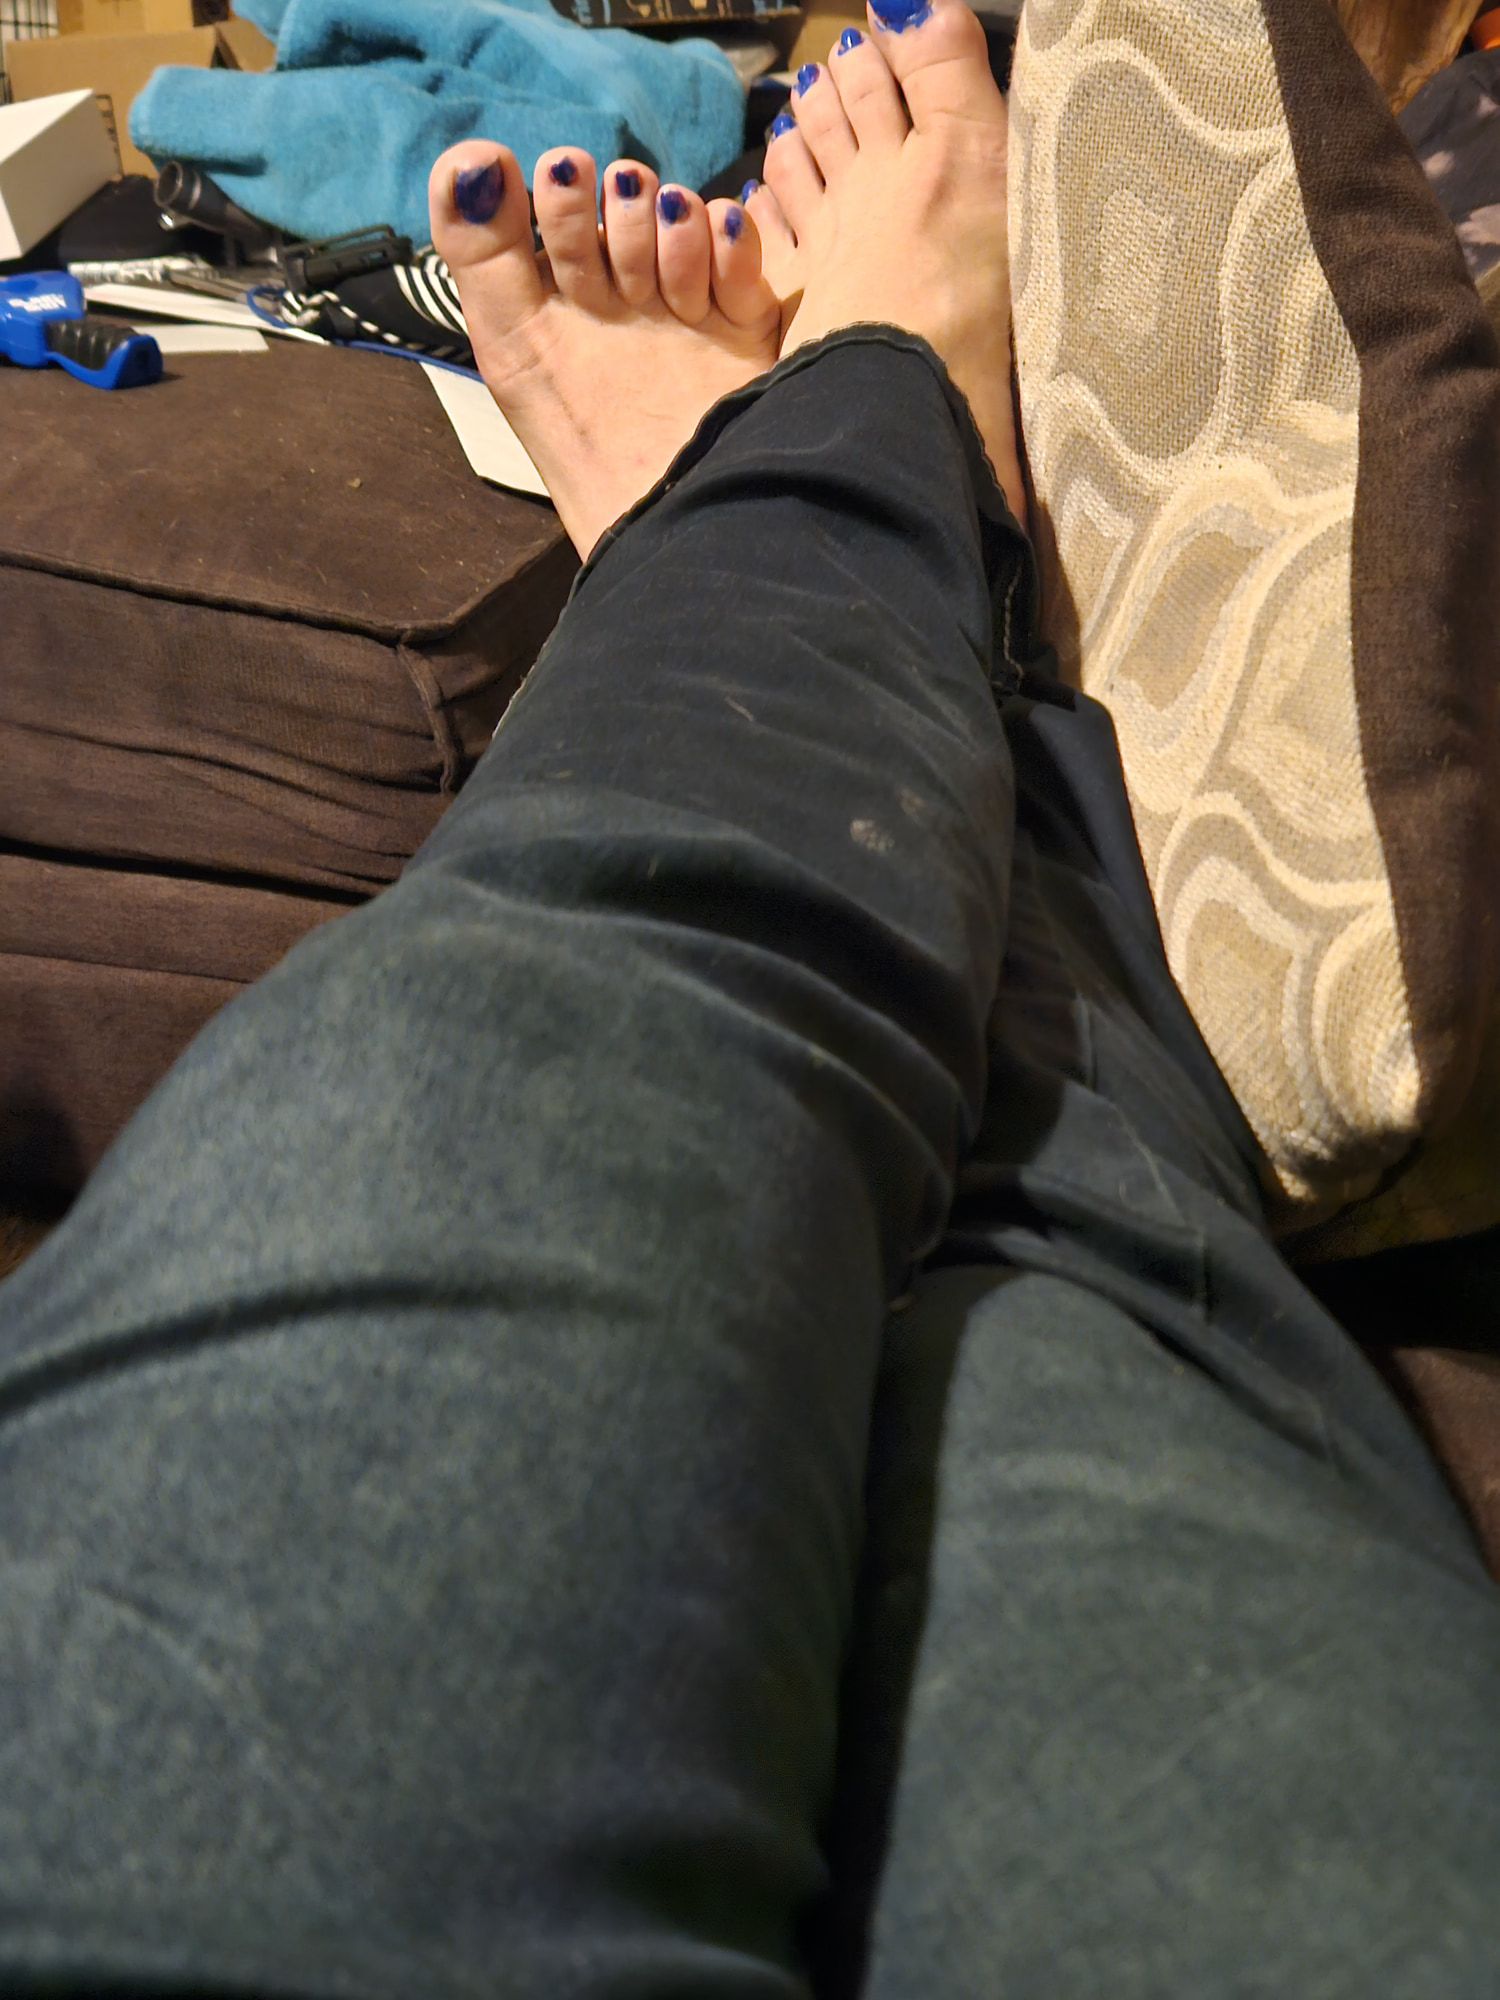 Sexy Feet and Legs